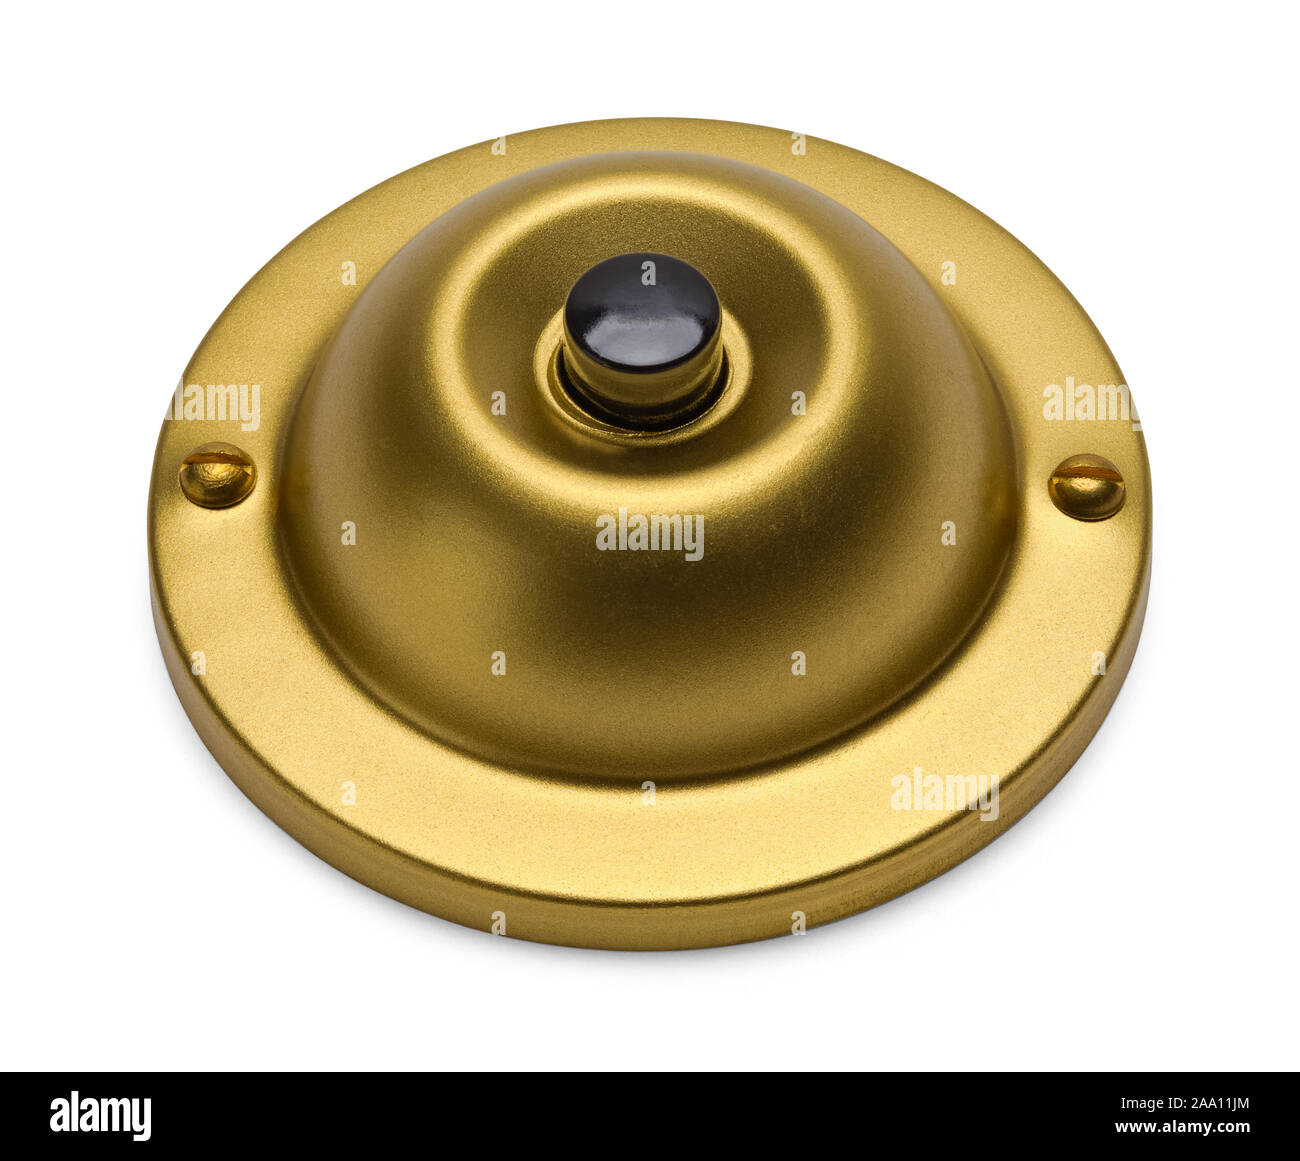 Round Brass Door Bell Isolated on White Background. Stock Photo